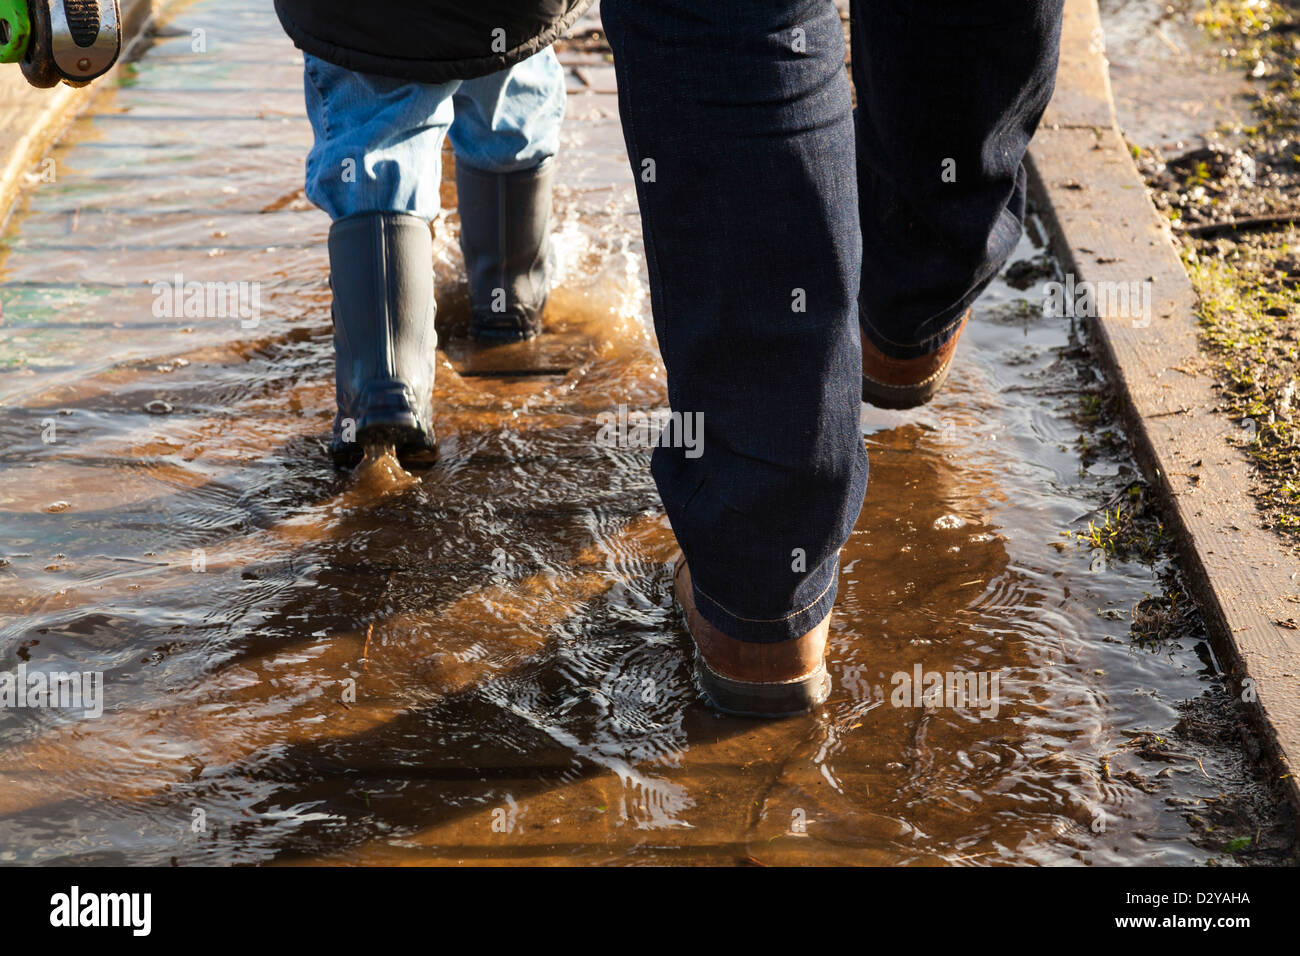 man in boots and child in wellingtons splashing through puddle on board path Stock Photo